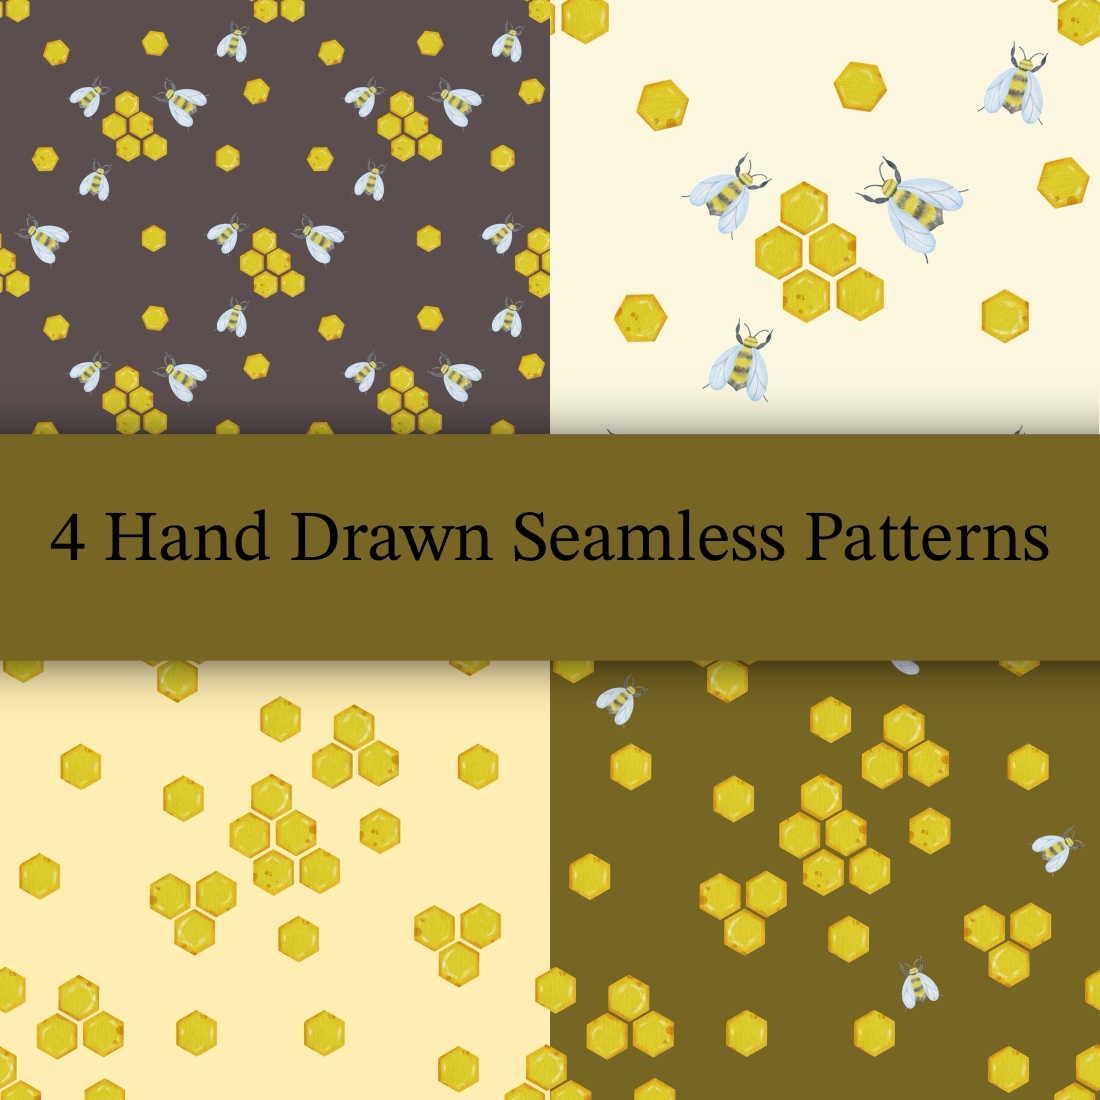 4 Hand Drawn Seamless Patterns cover image.